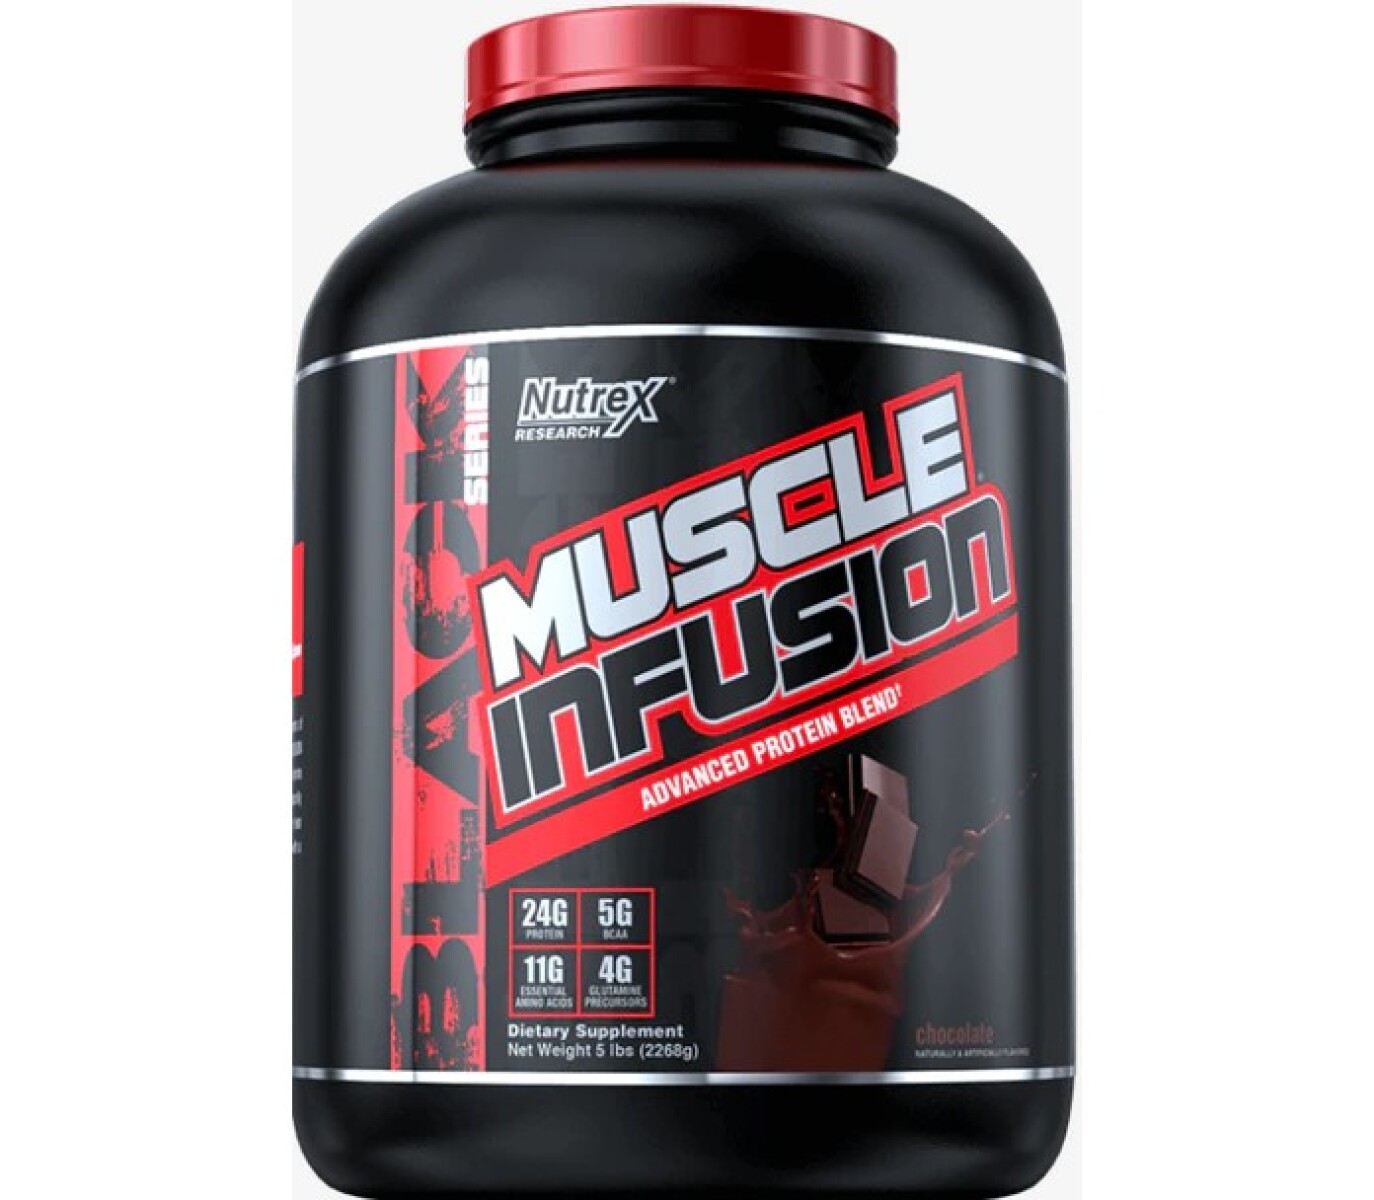 Nutrex Proteina Muscle Infusion (5lbs) - Chocolate 